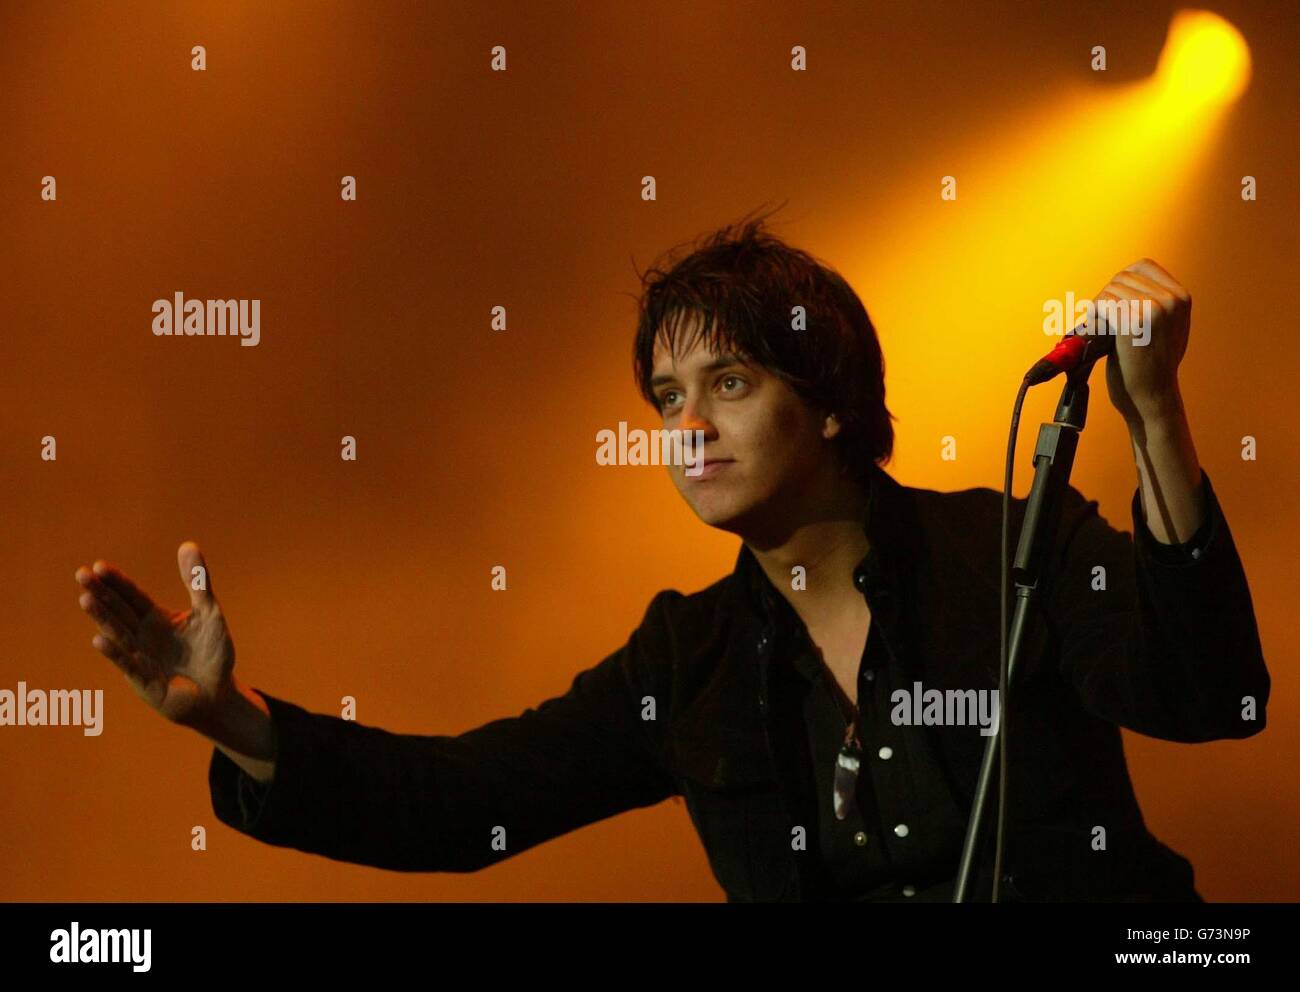 Julian Casablancas, lead singer of The Strokes on the on the main stageduring the second day of T in the Park, the two-day music festival event in Balado near Stirling Sunday Stock Photo